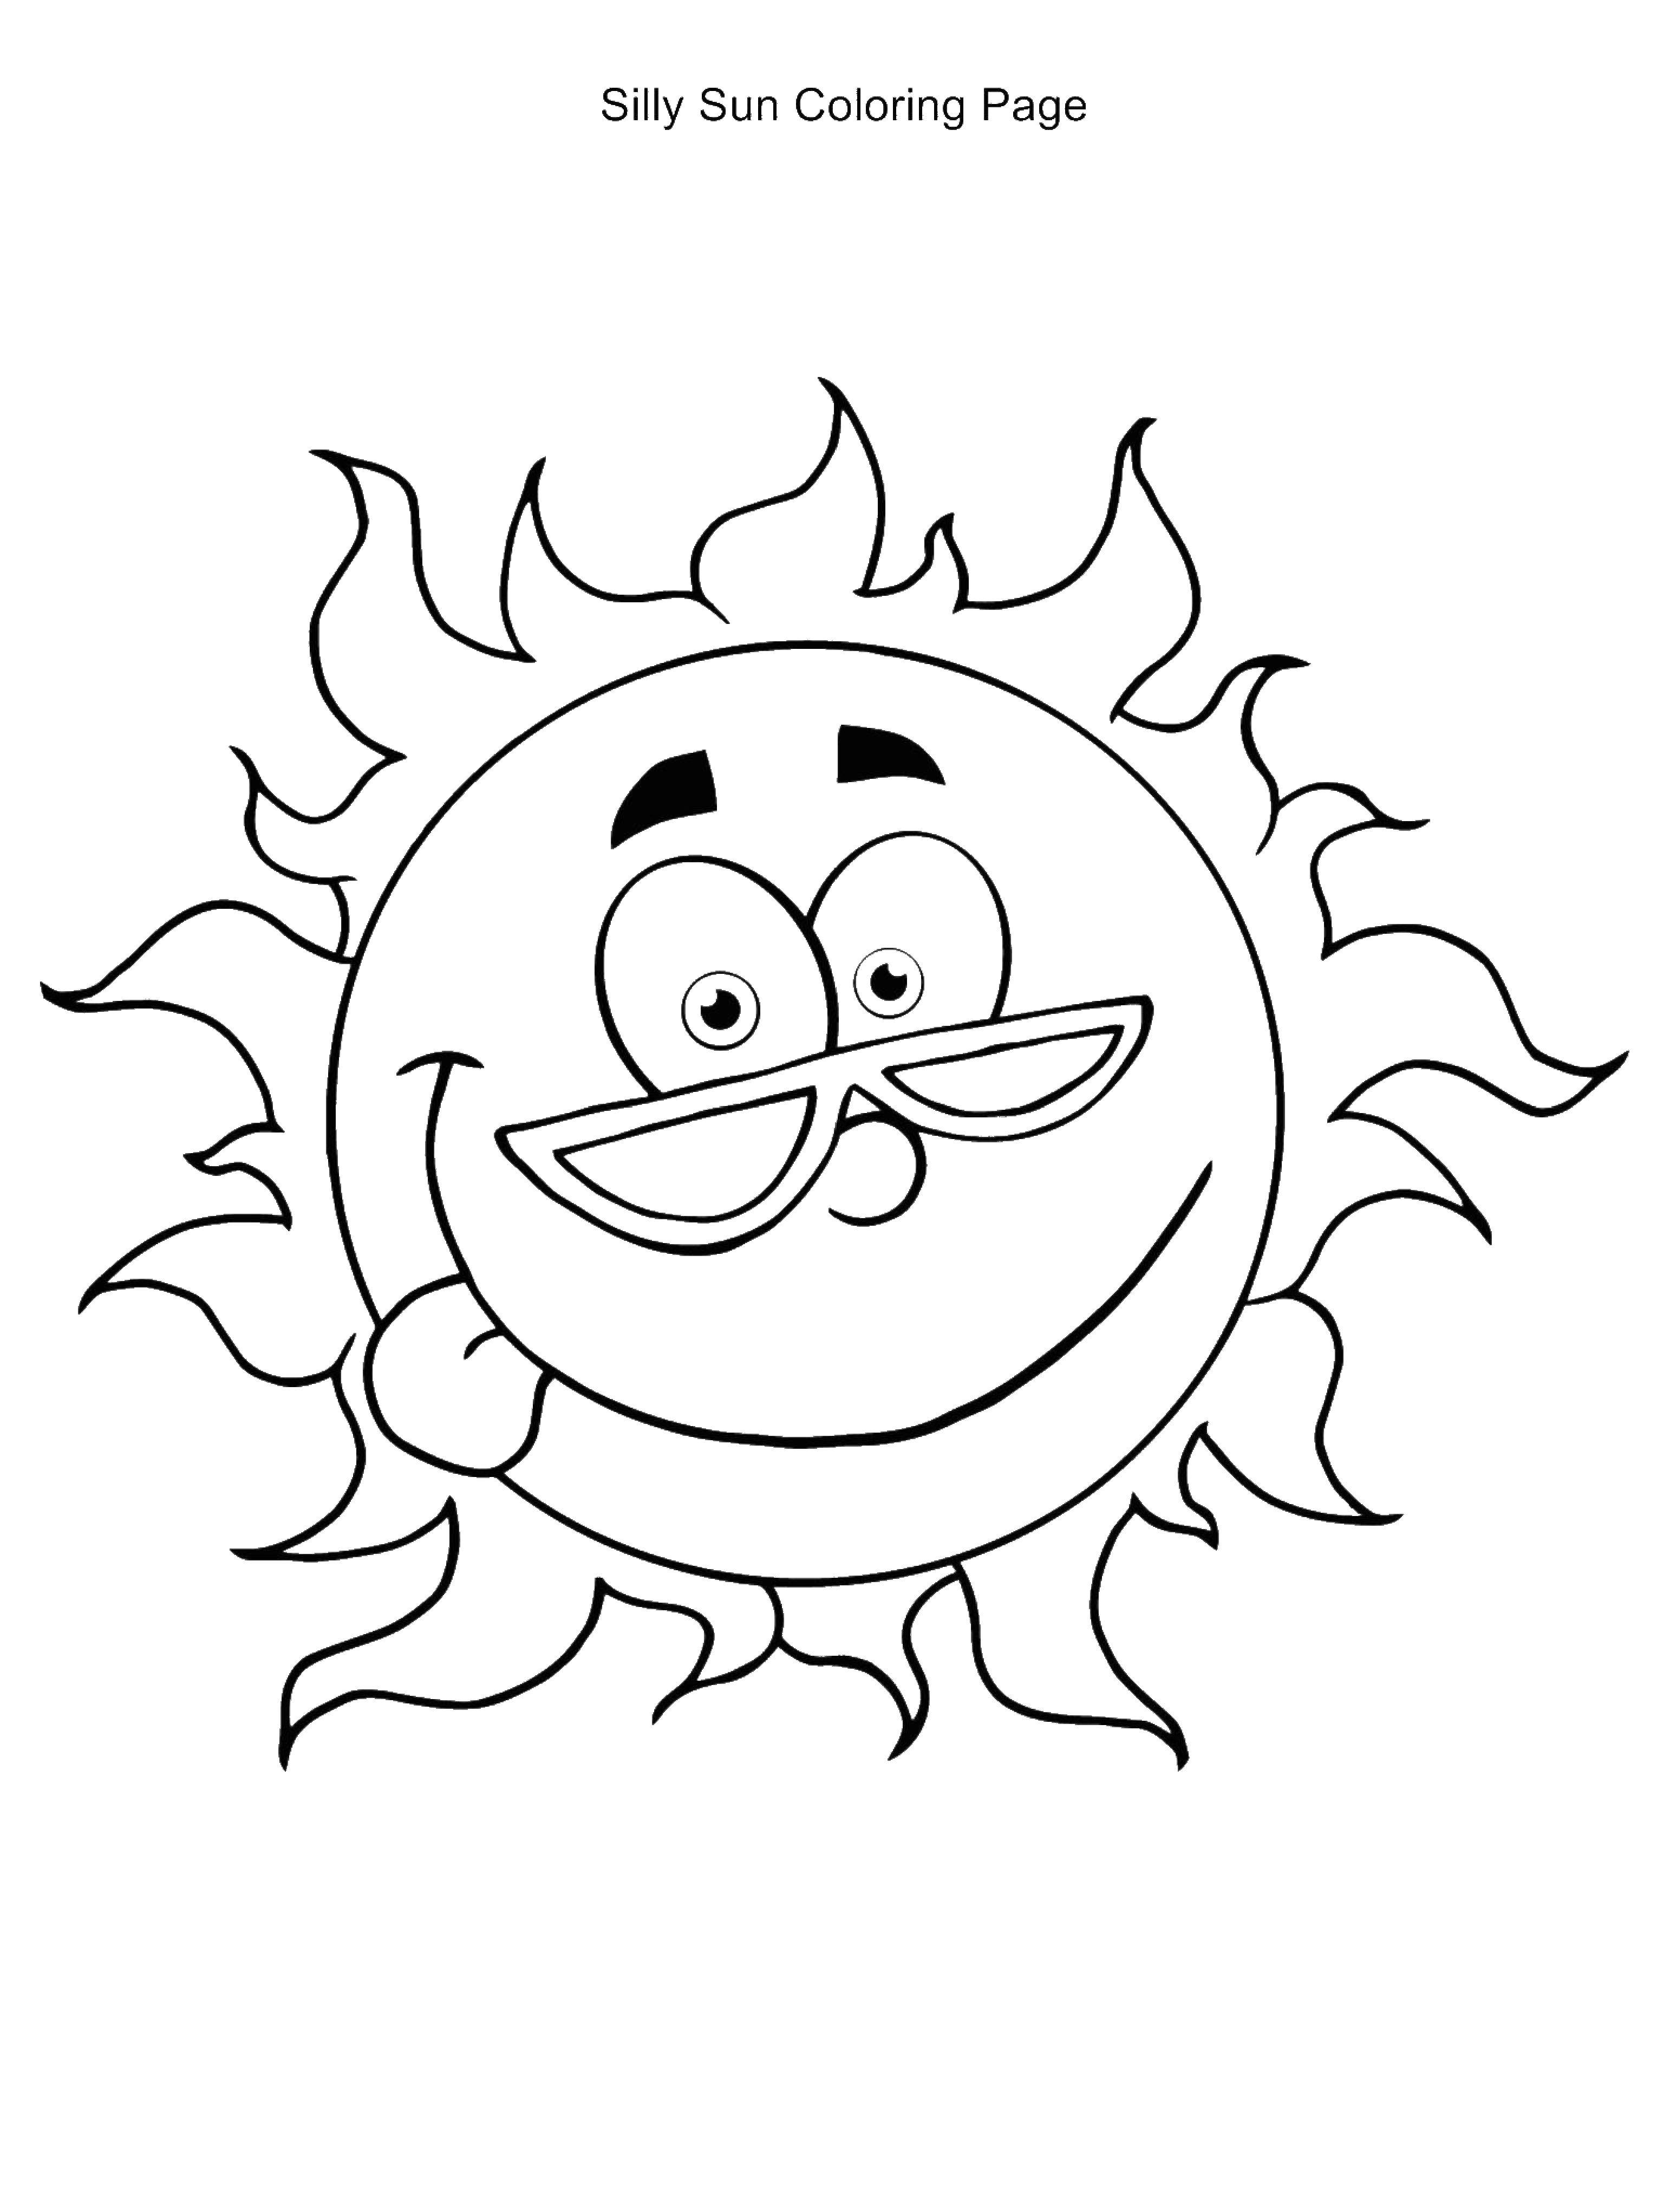 Coloring Happy sun. Category The sun. Tags:  the sun.